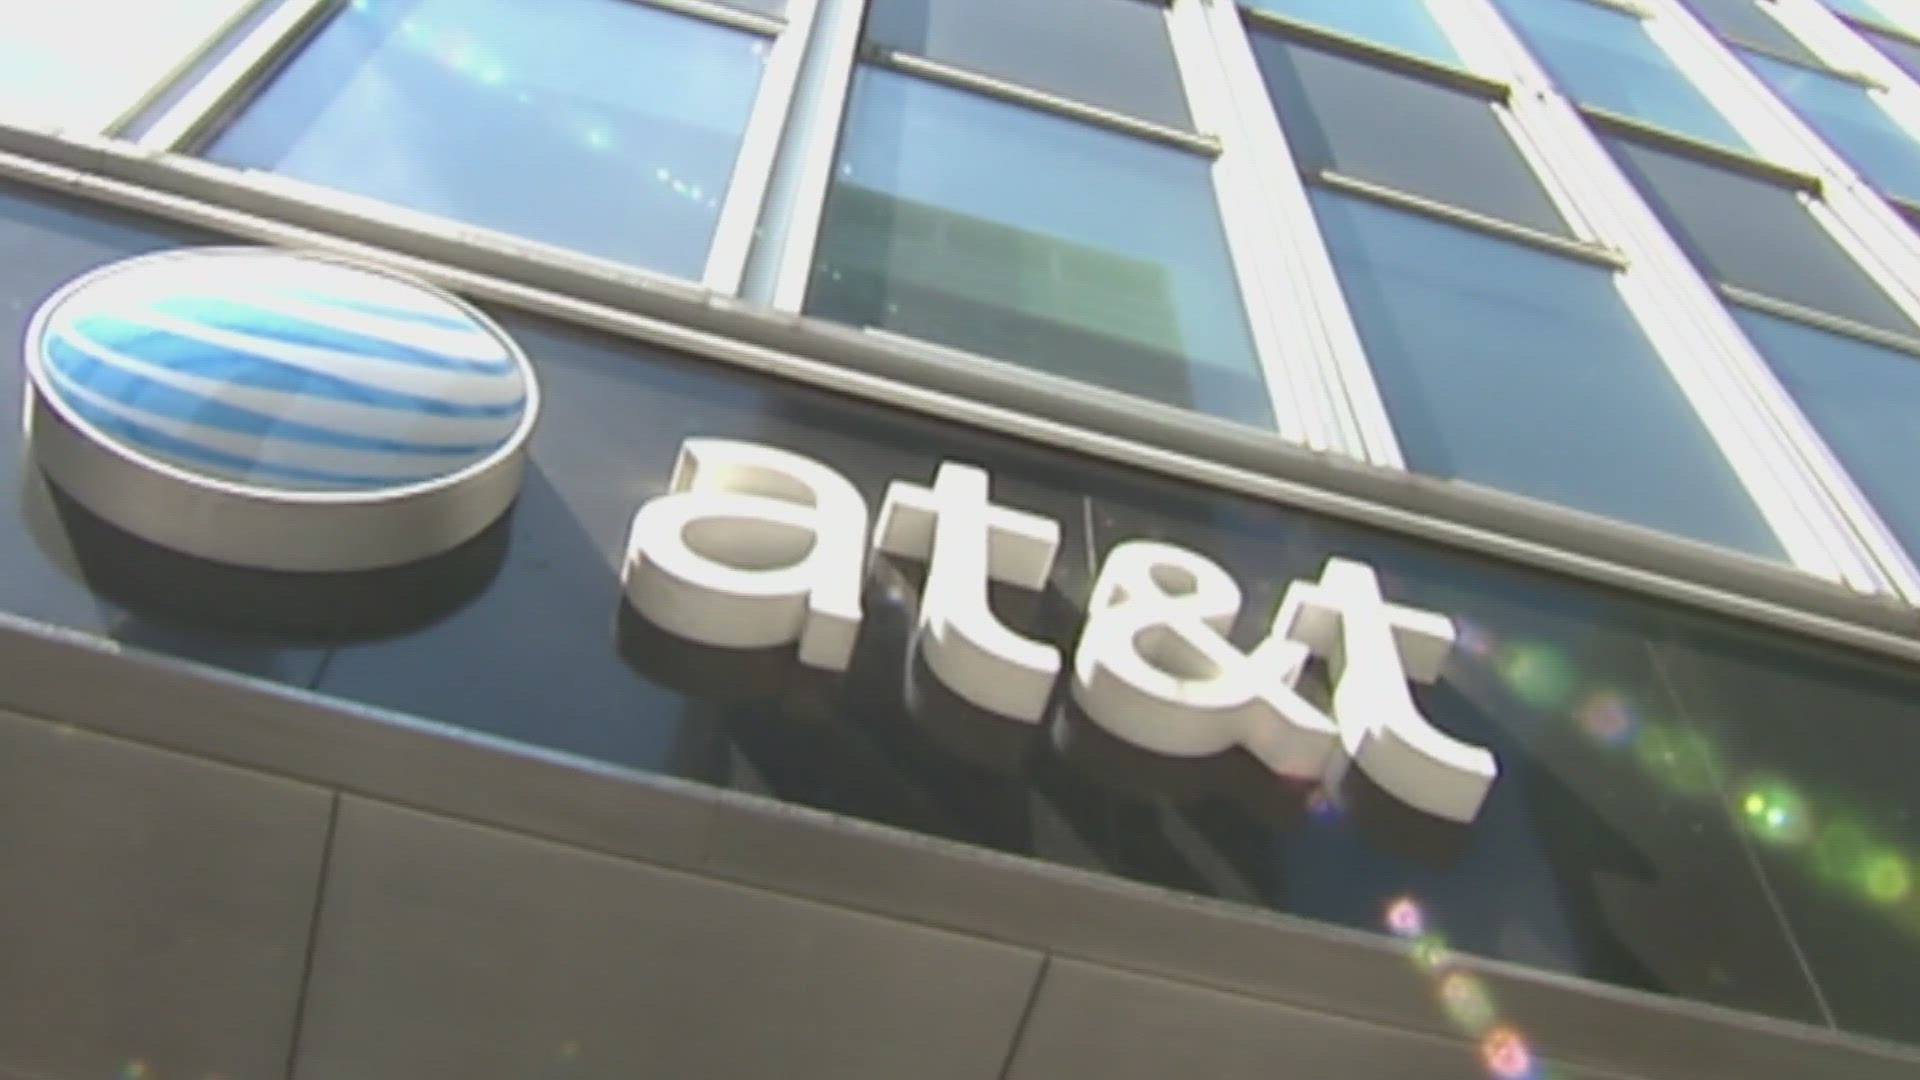 AT&T said Thursday that most of the people affected by a nationwide service outage have cell service again.